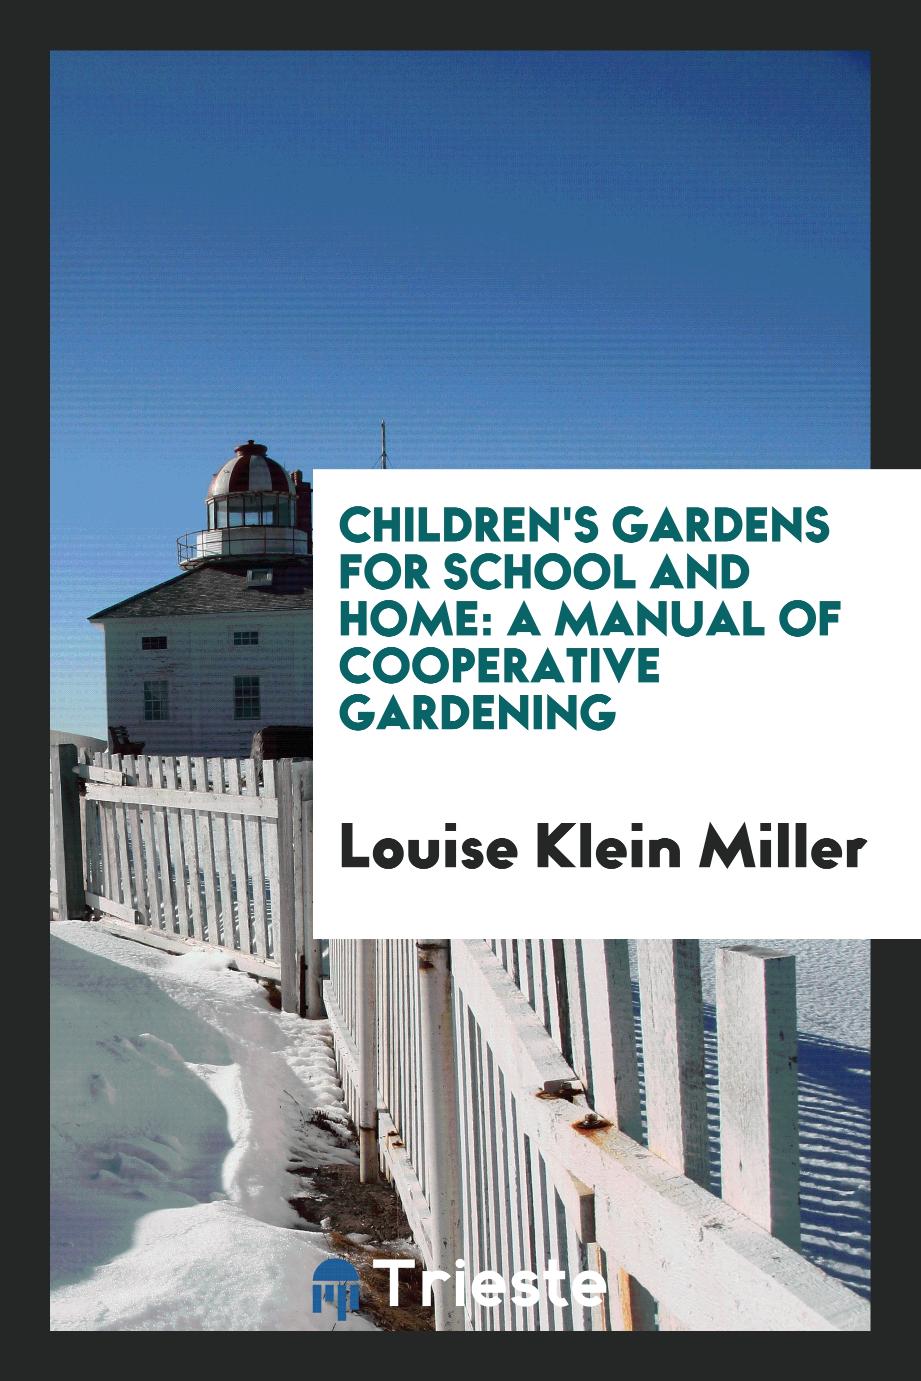 Children's Gardens for School and Home: A Manual of Cooperative Gardening